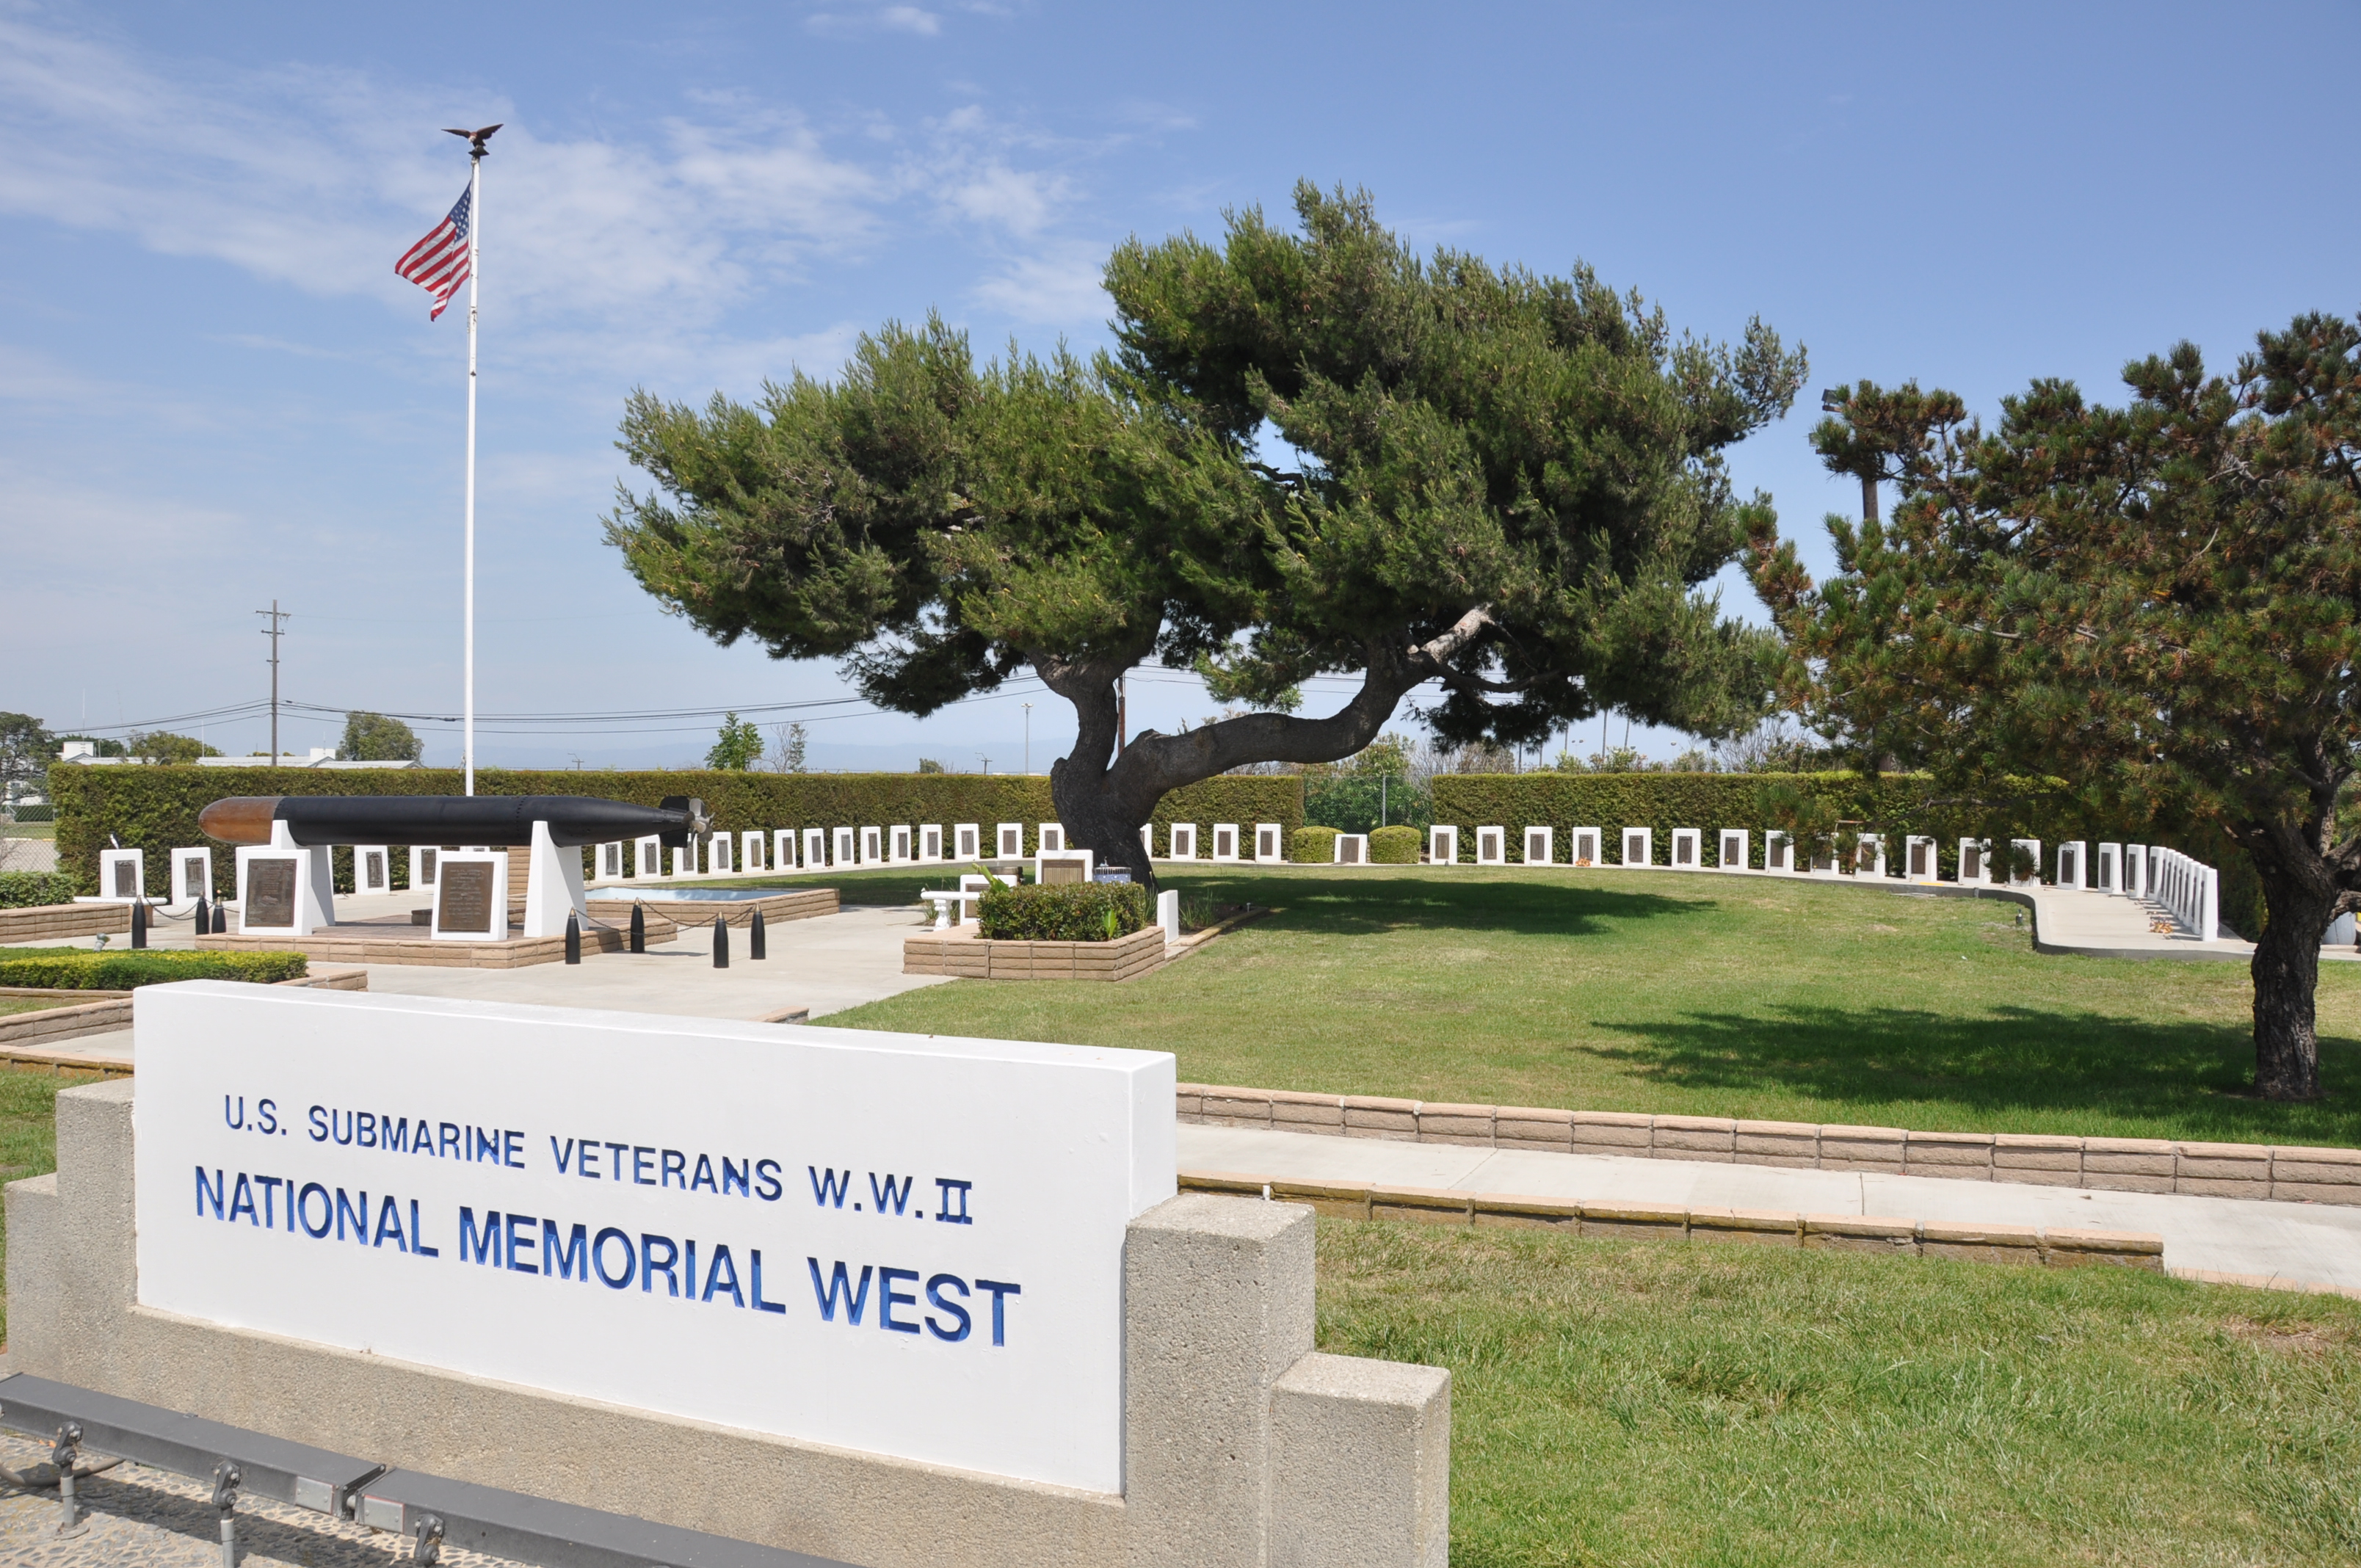 The National WWII Submarine Memorial West